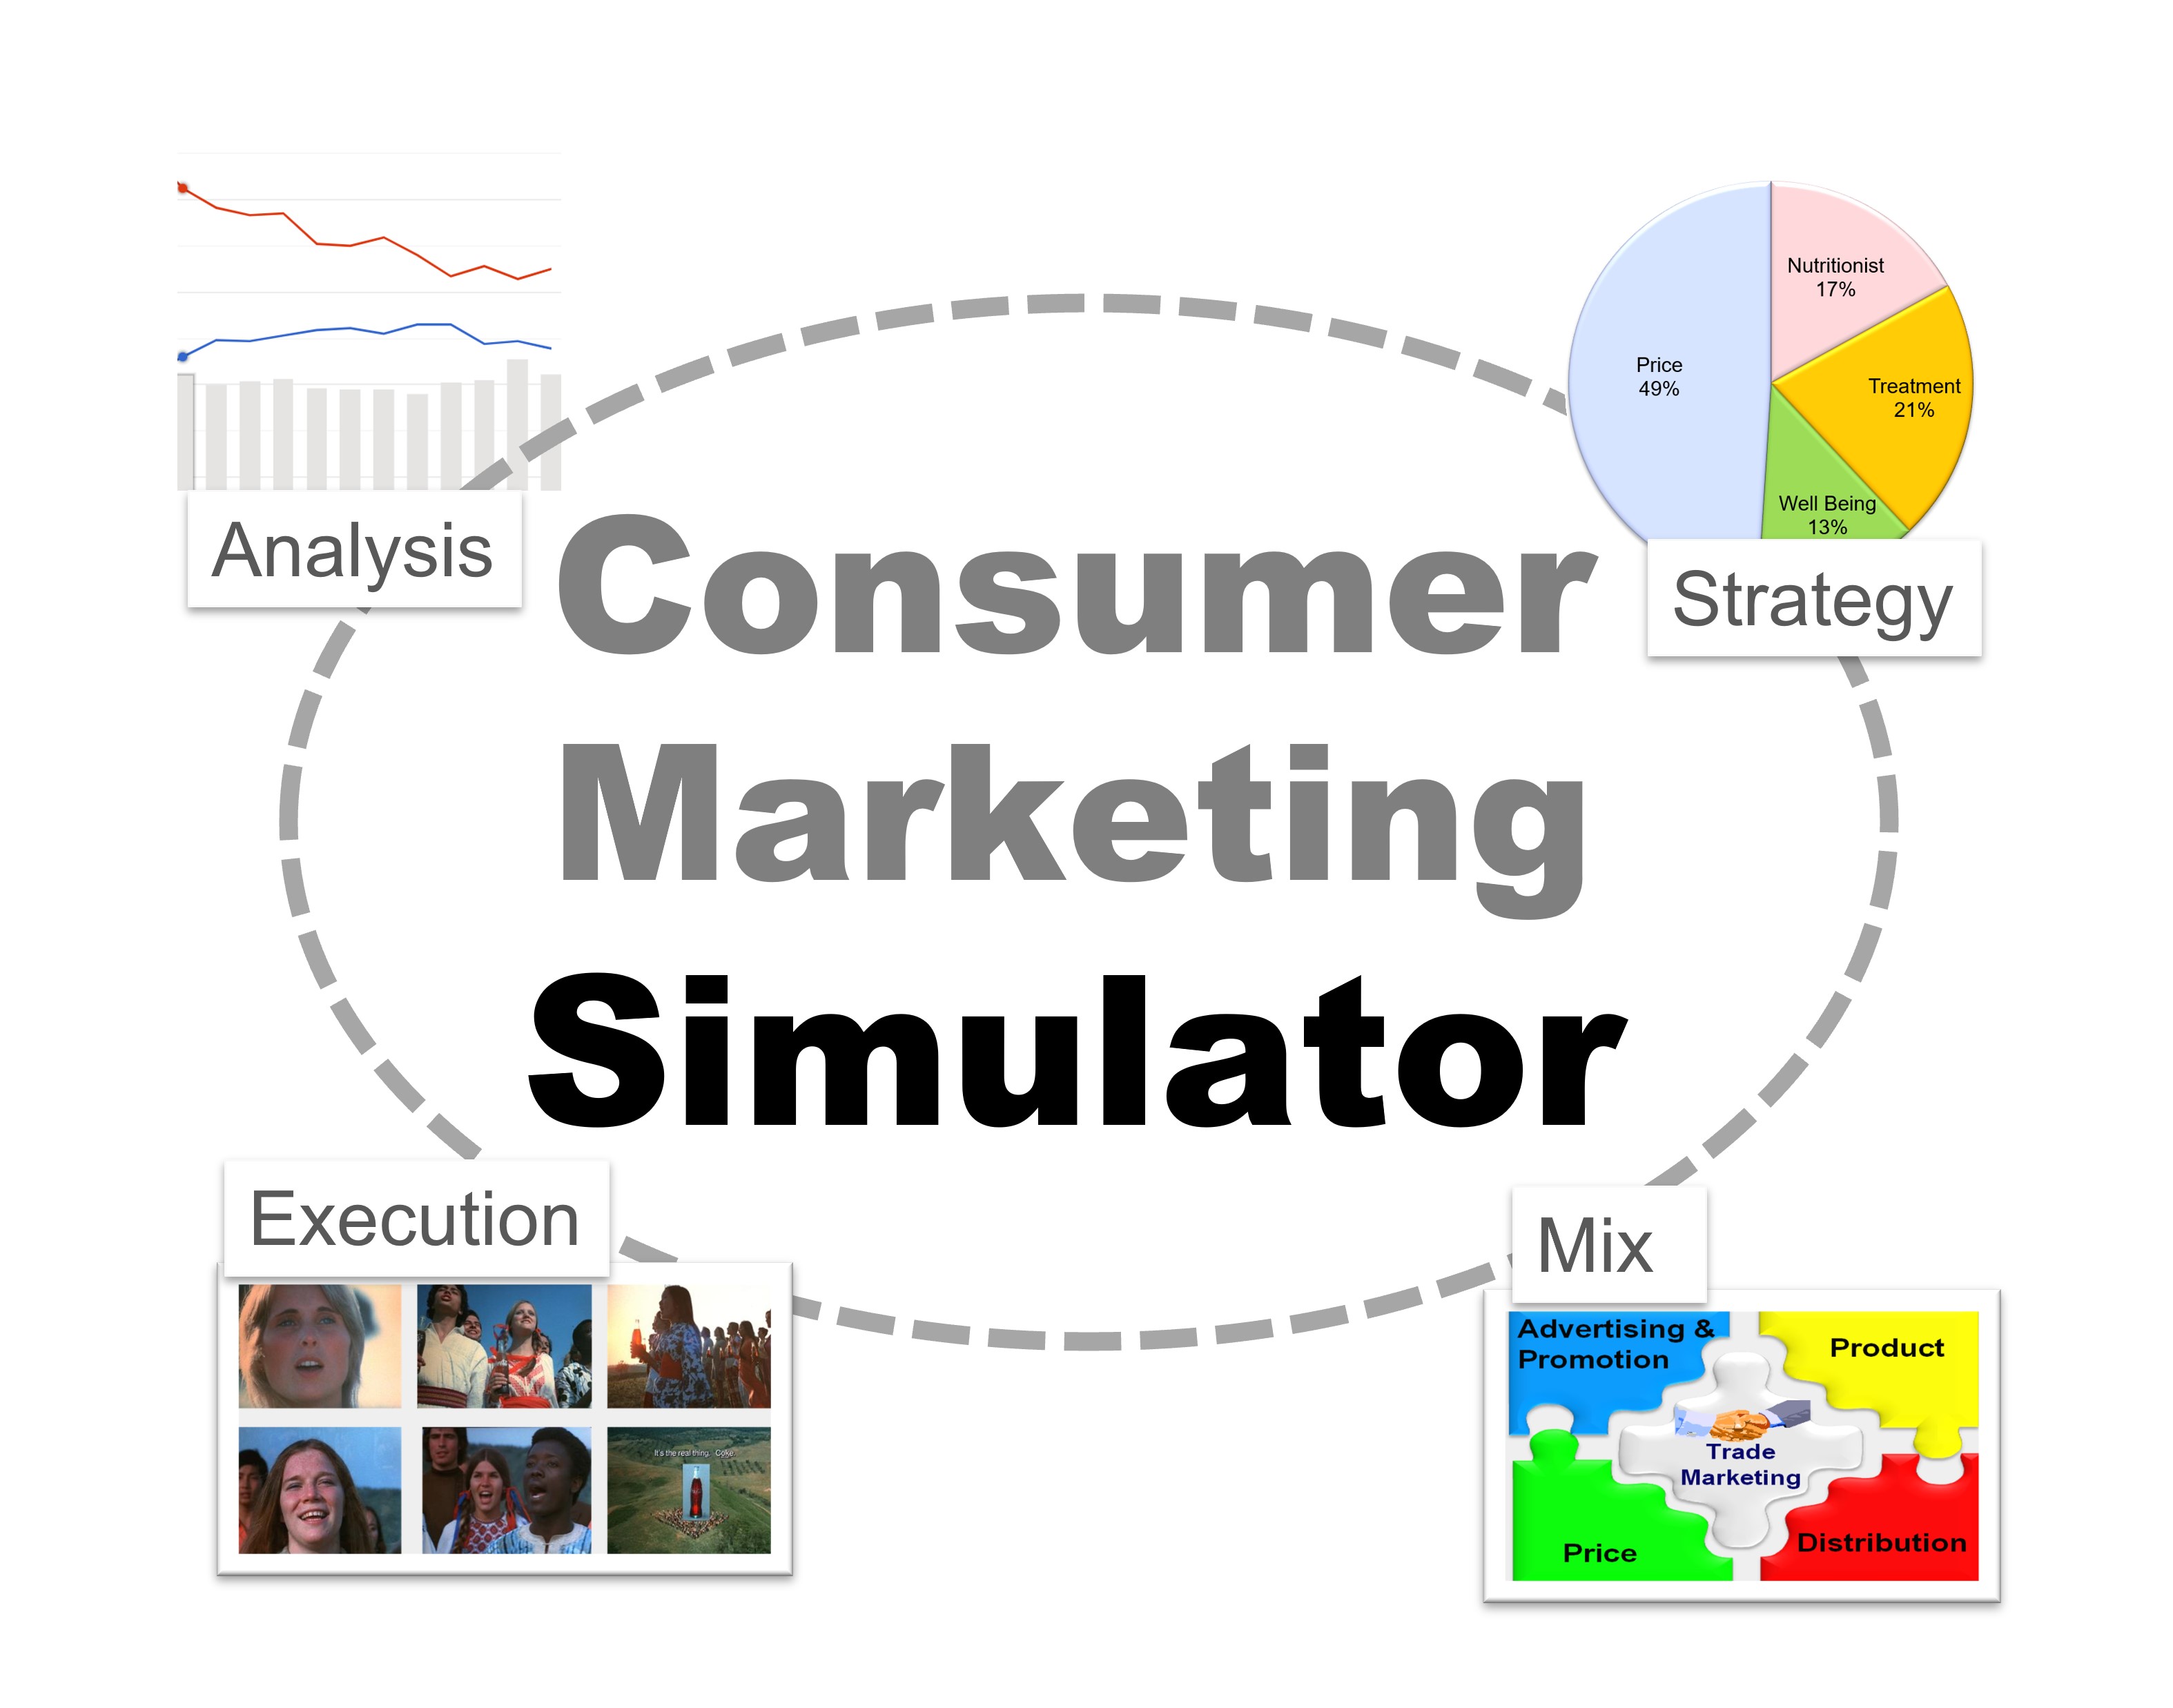 Marketing simulators that impart much needed combat experiences, should become essential training platforms for marketing professionals.